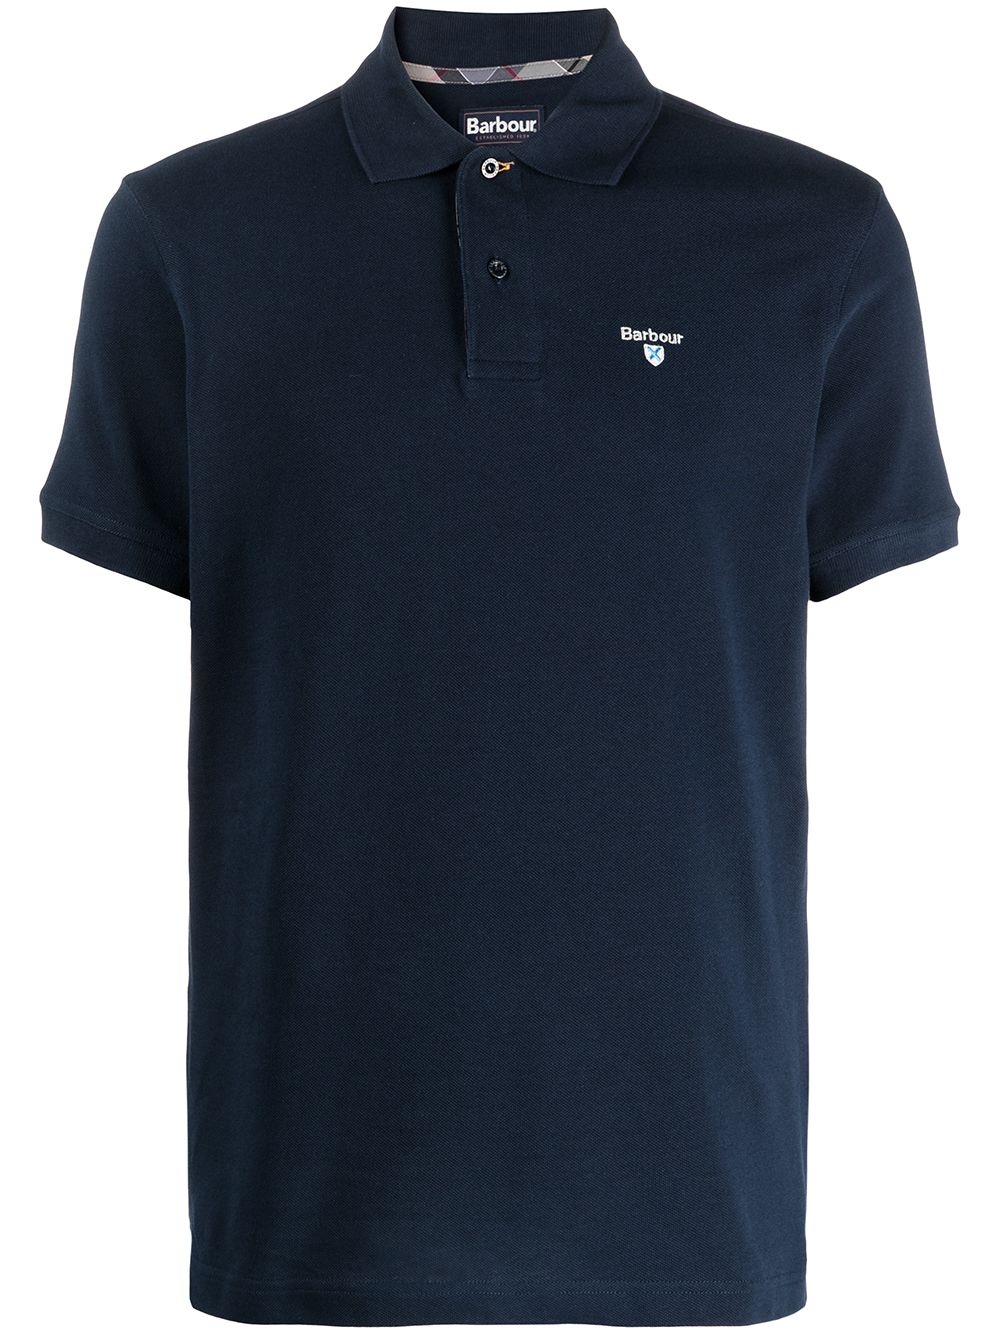 Barbour Logo Embroidered Polo Shirt - Farfetch